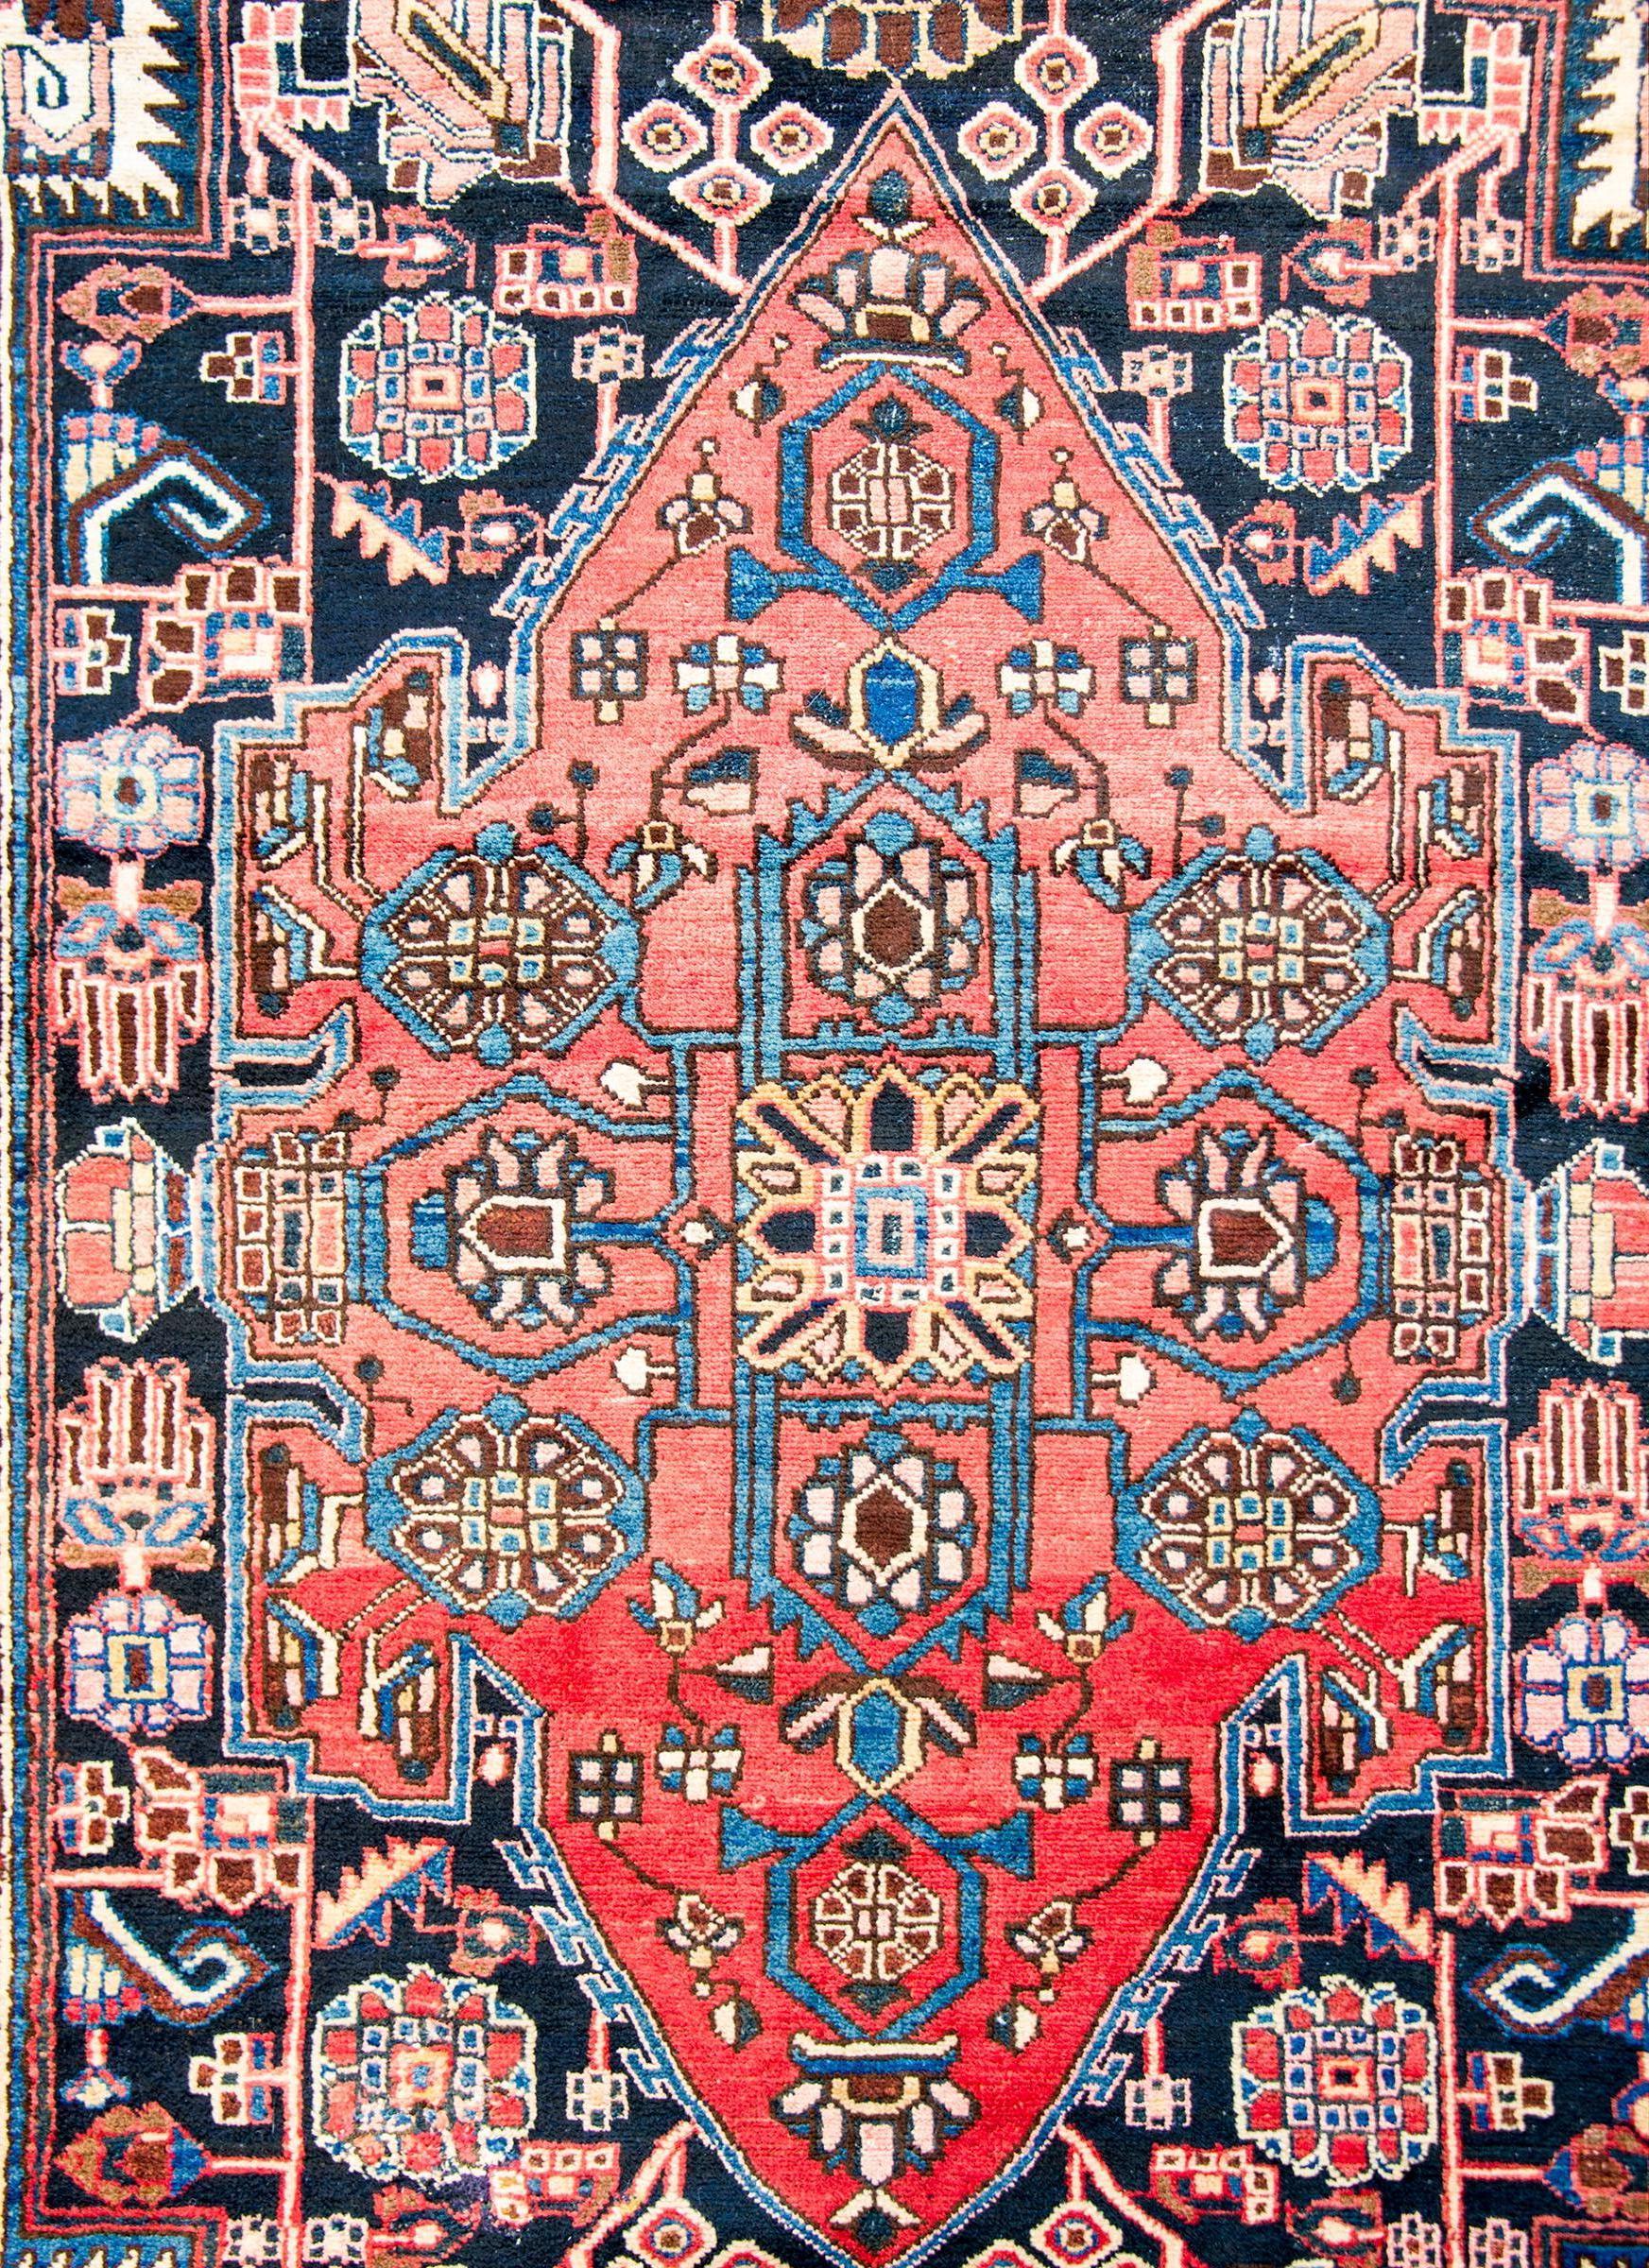 A mid-20th century Persian Mazlaghan rug with a fantastic mirrored tribal pattern with a large abrash crimson medallion with floral and scrolling vine pattern, on an indigo background with similarly styled flowers. The border is thin, with a central